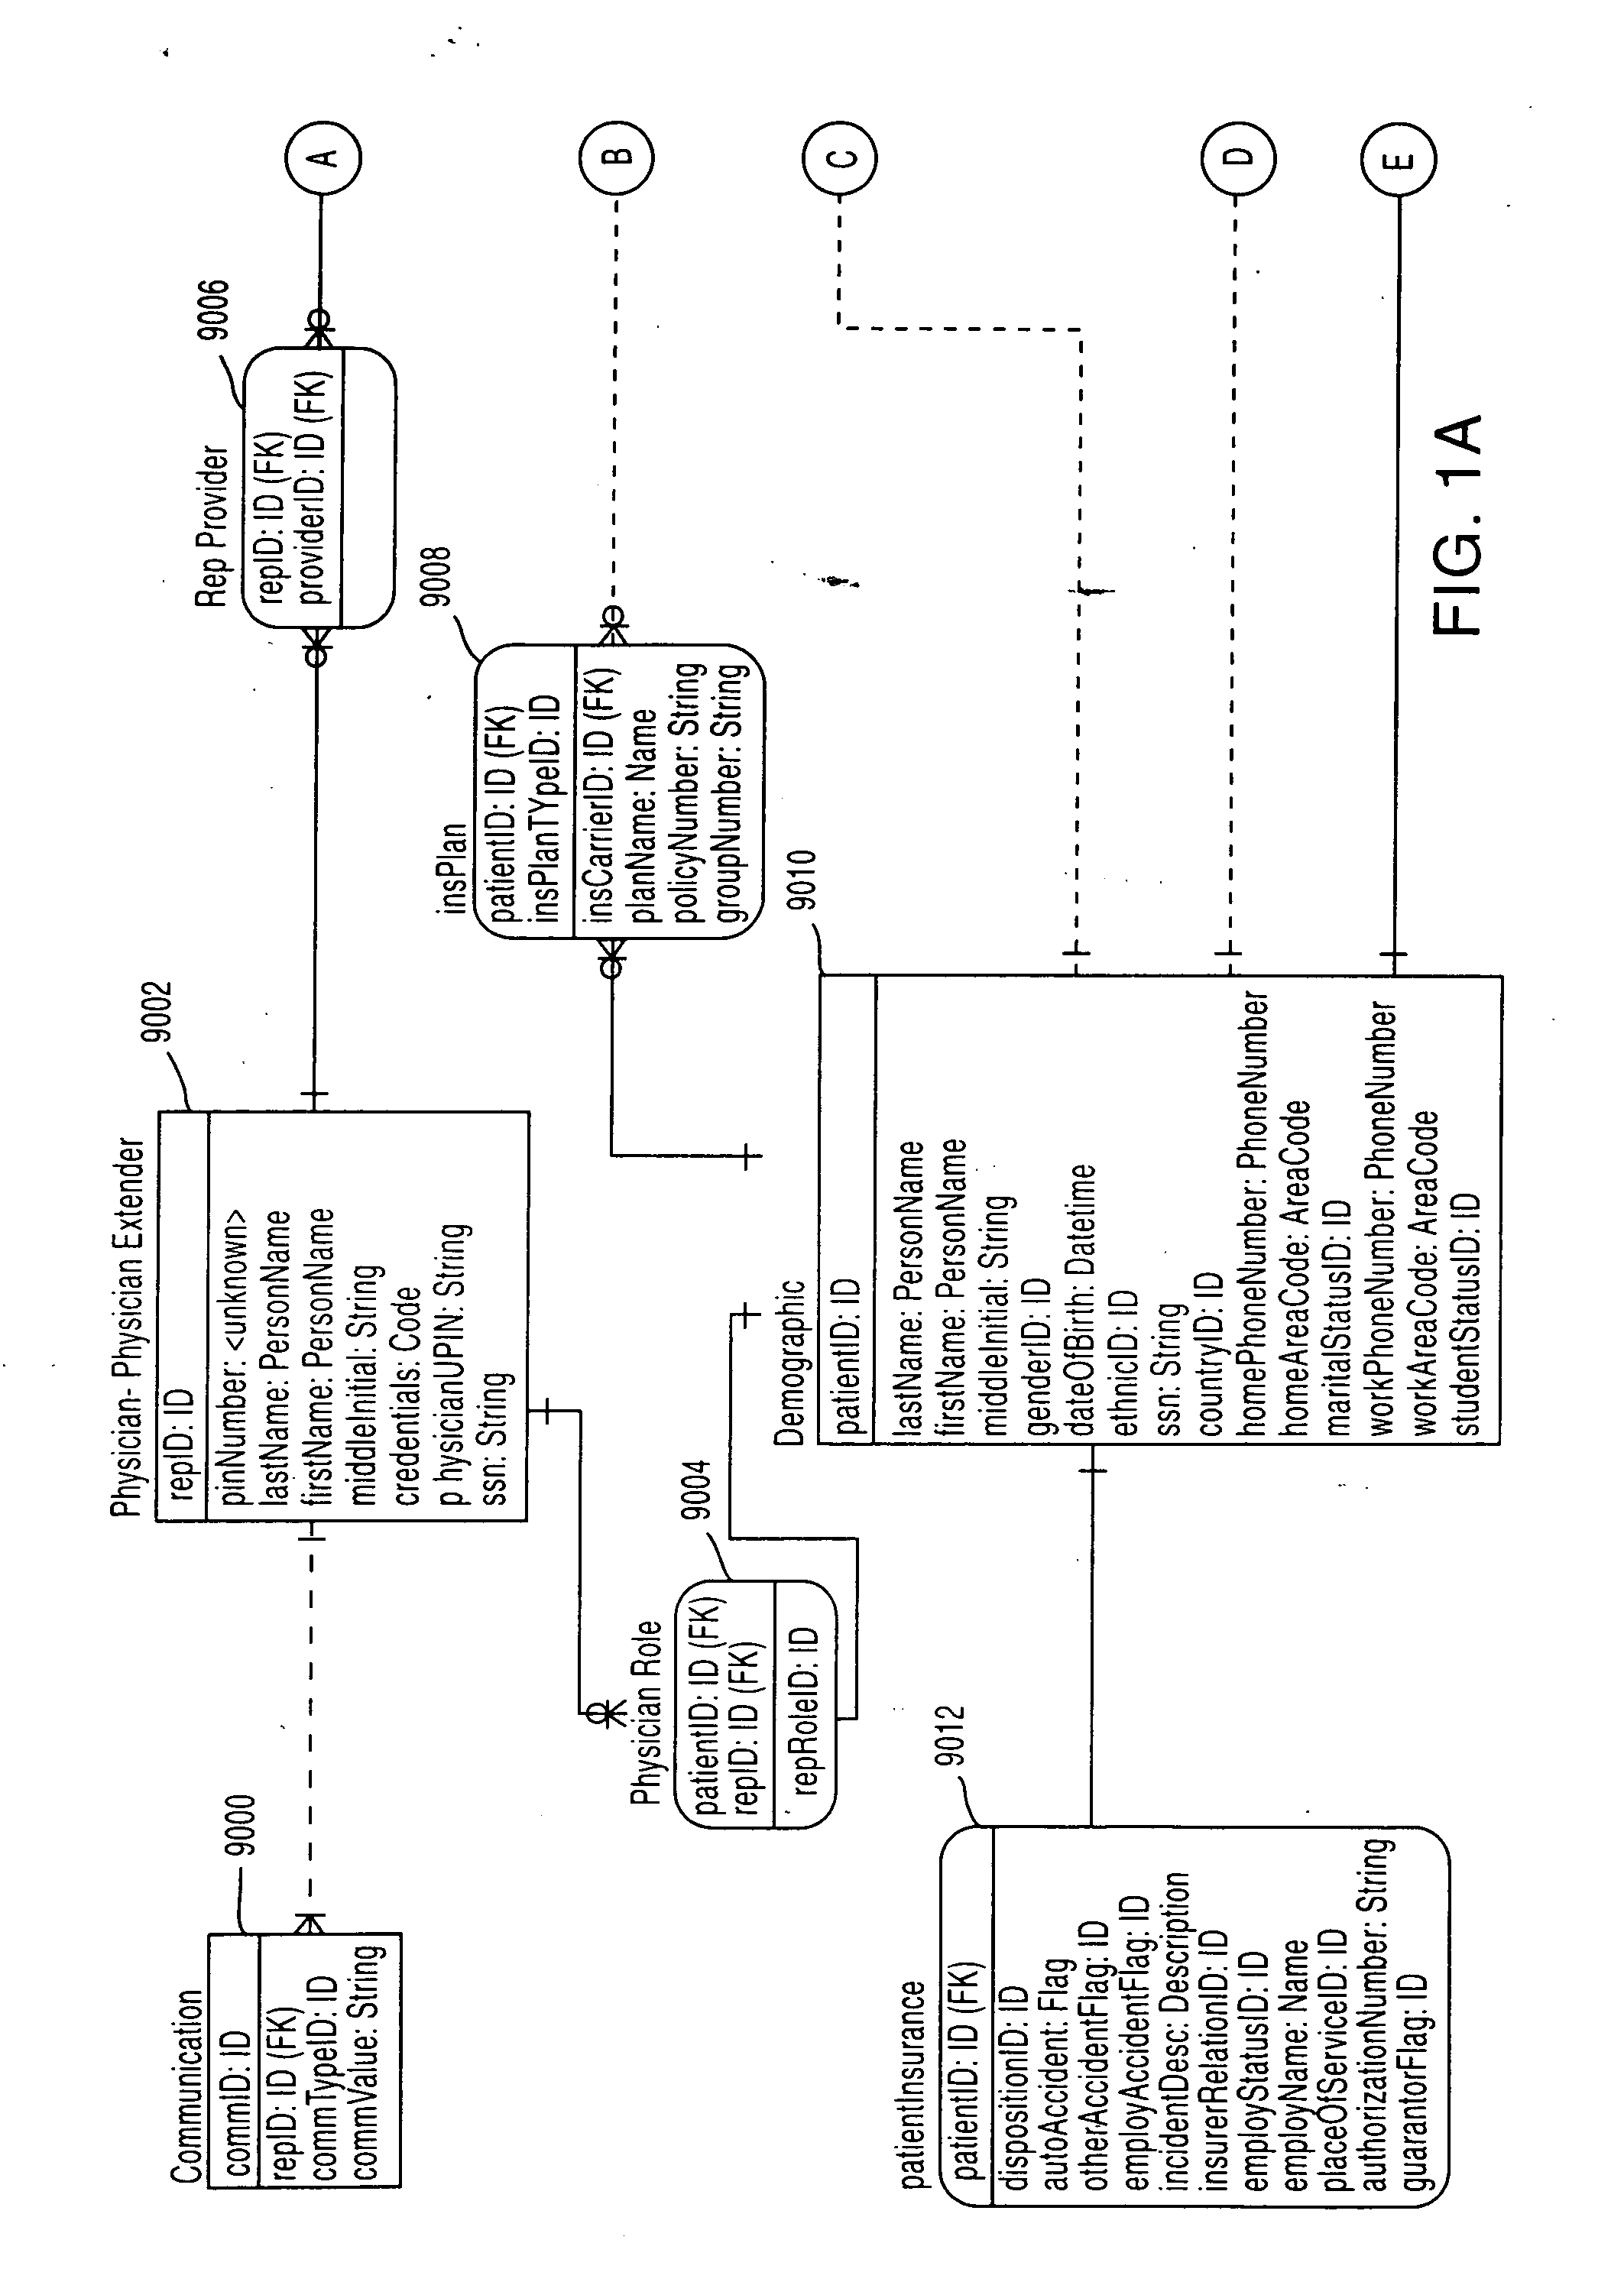 System and method for video observation of a patient in a health care location